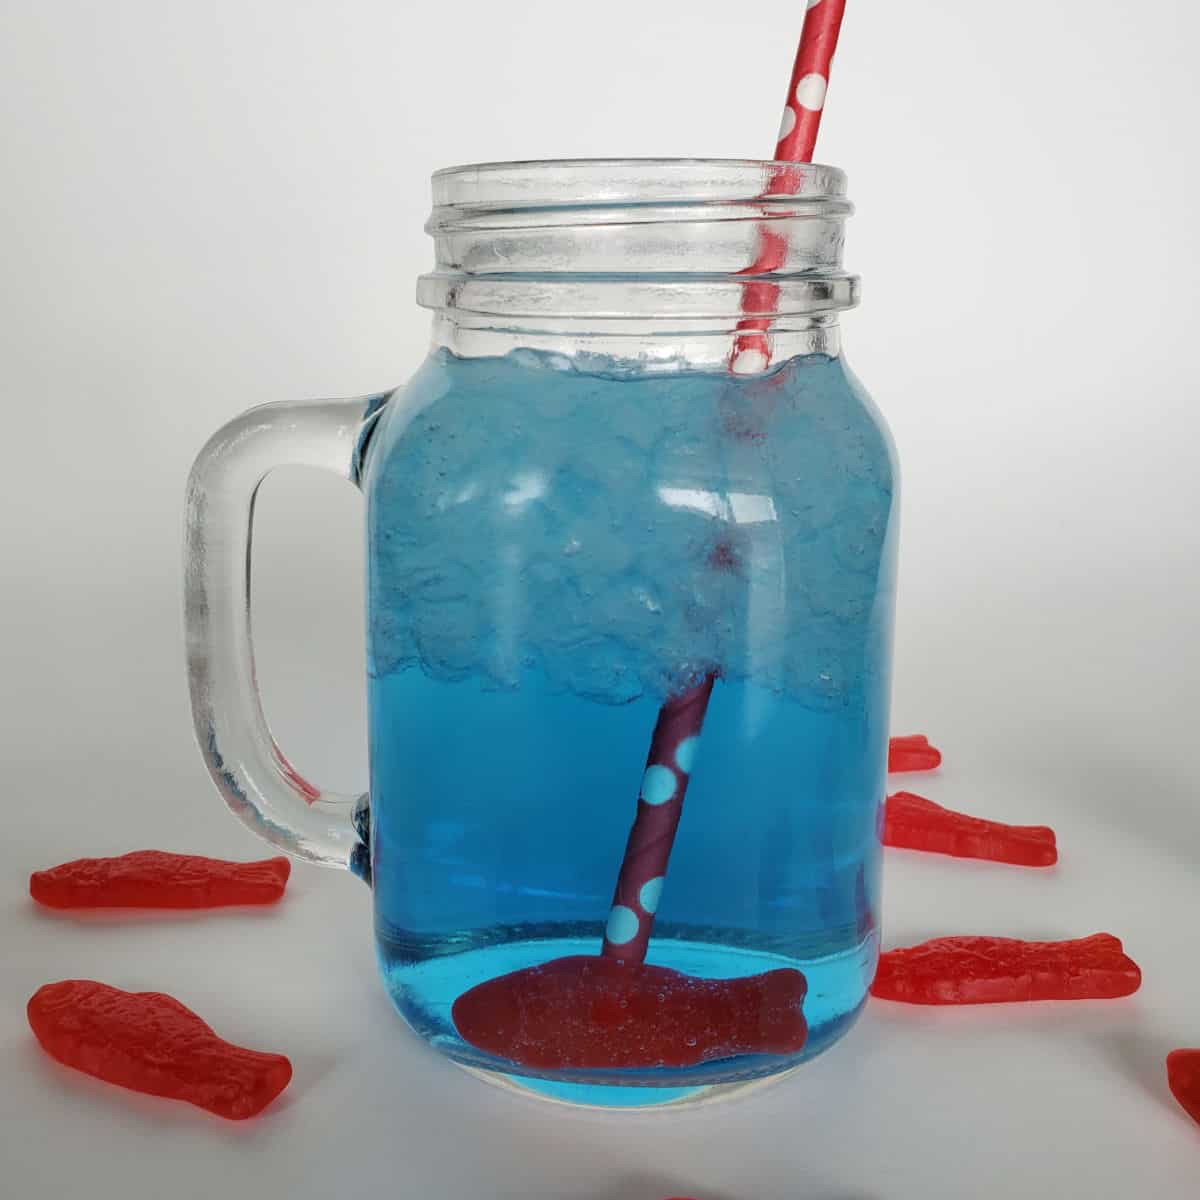 Sonic ocean water in a mason jar with a Swedish fish candy and red straw